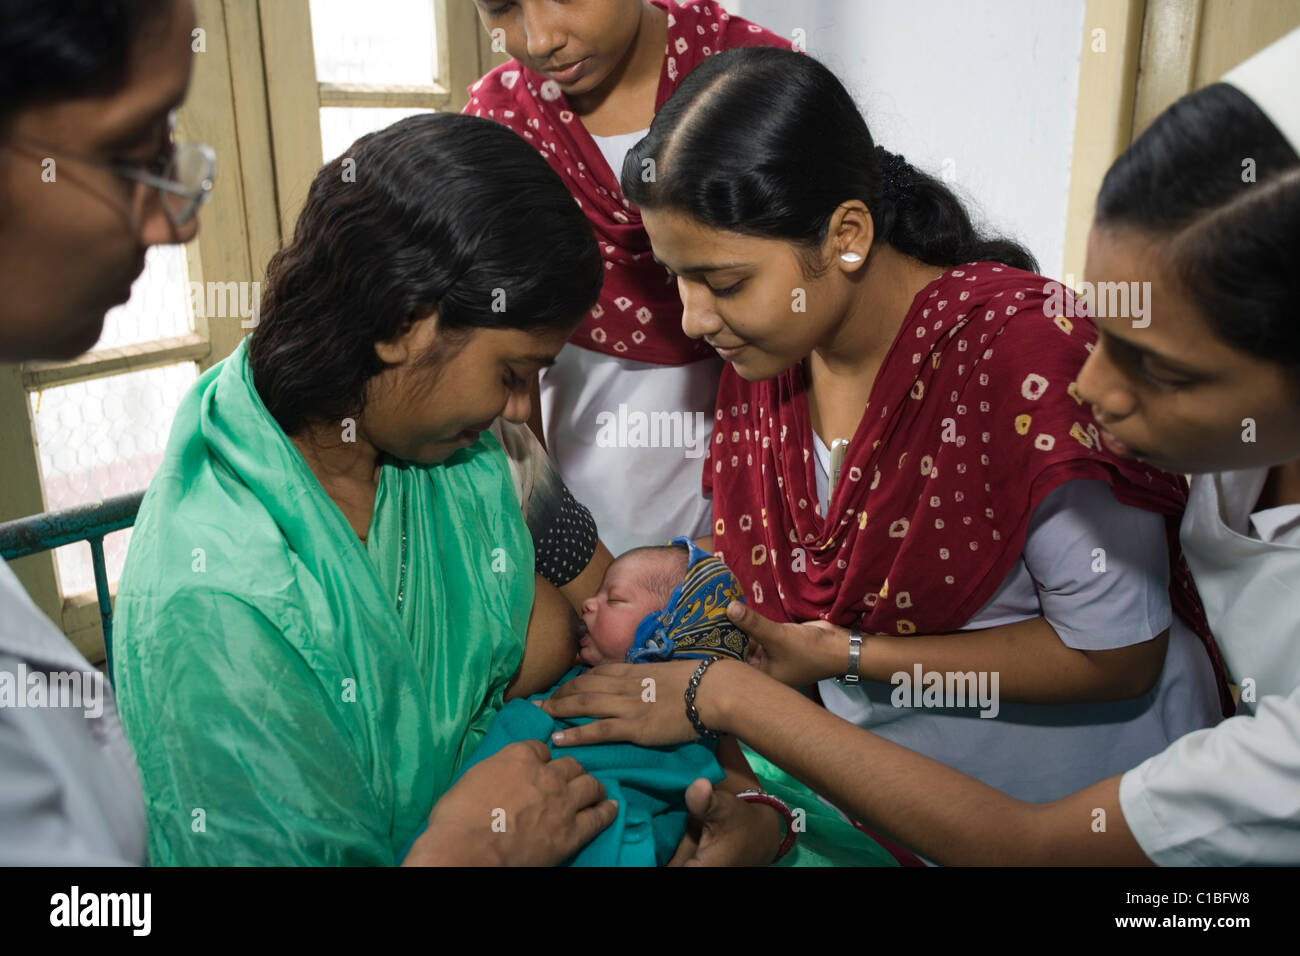 Midwives at Kolkata Nursing College help new mother to breastfeed, India Stock Photo